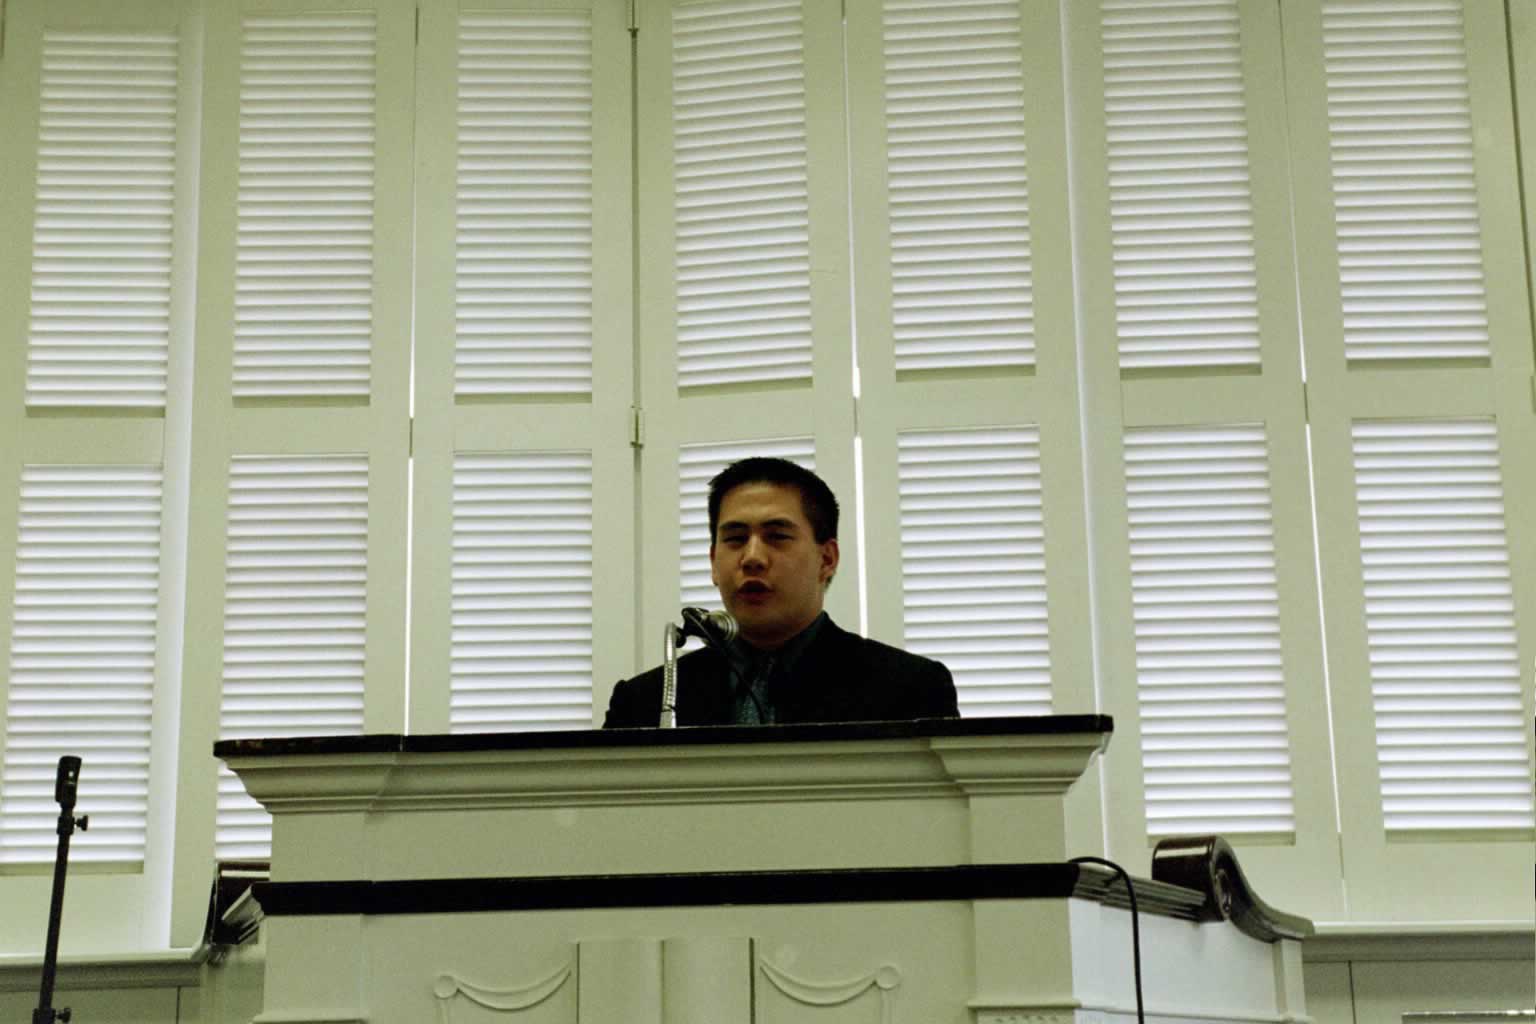 picture of man standing behind a podium speaking